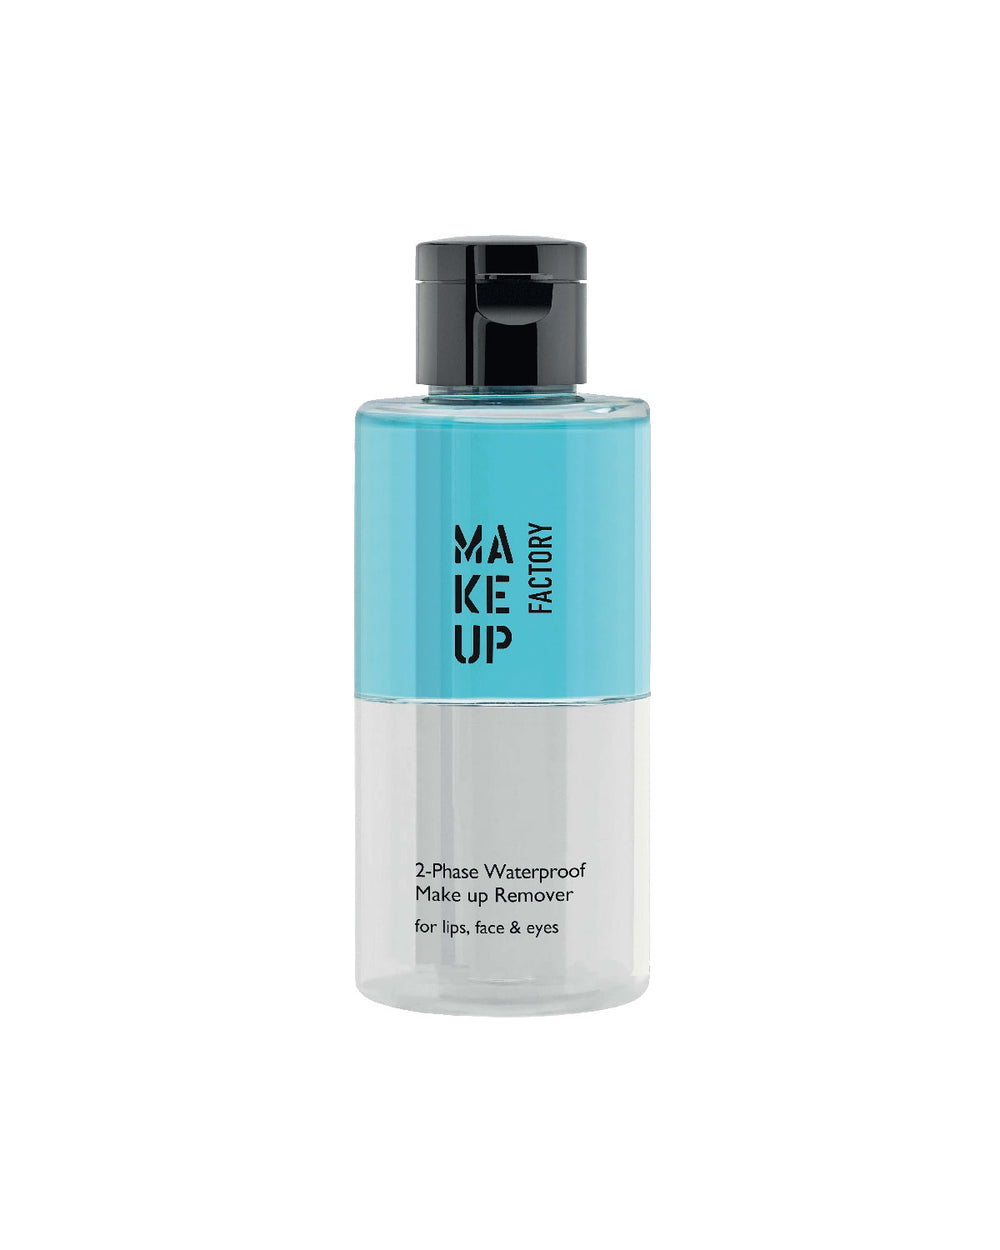 2-Phase Waterproof Make up Remover